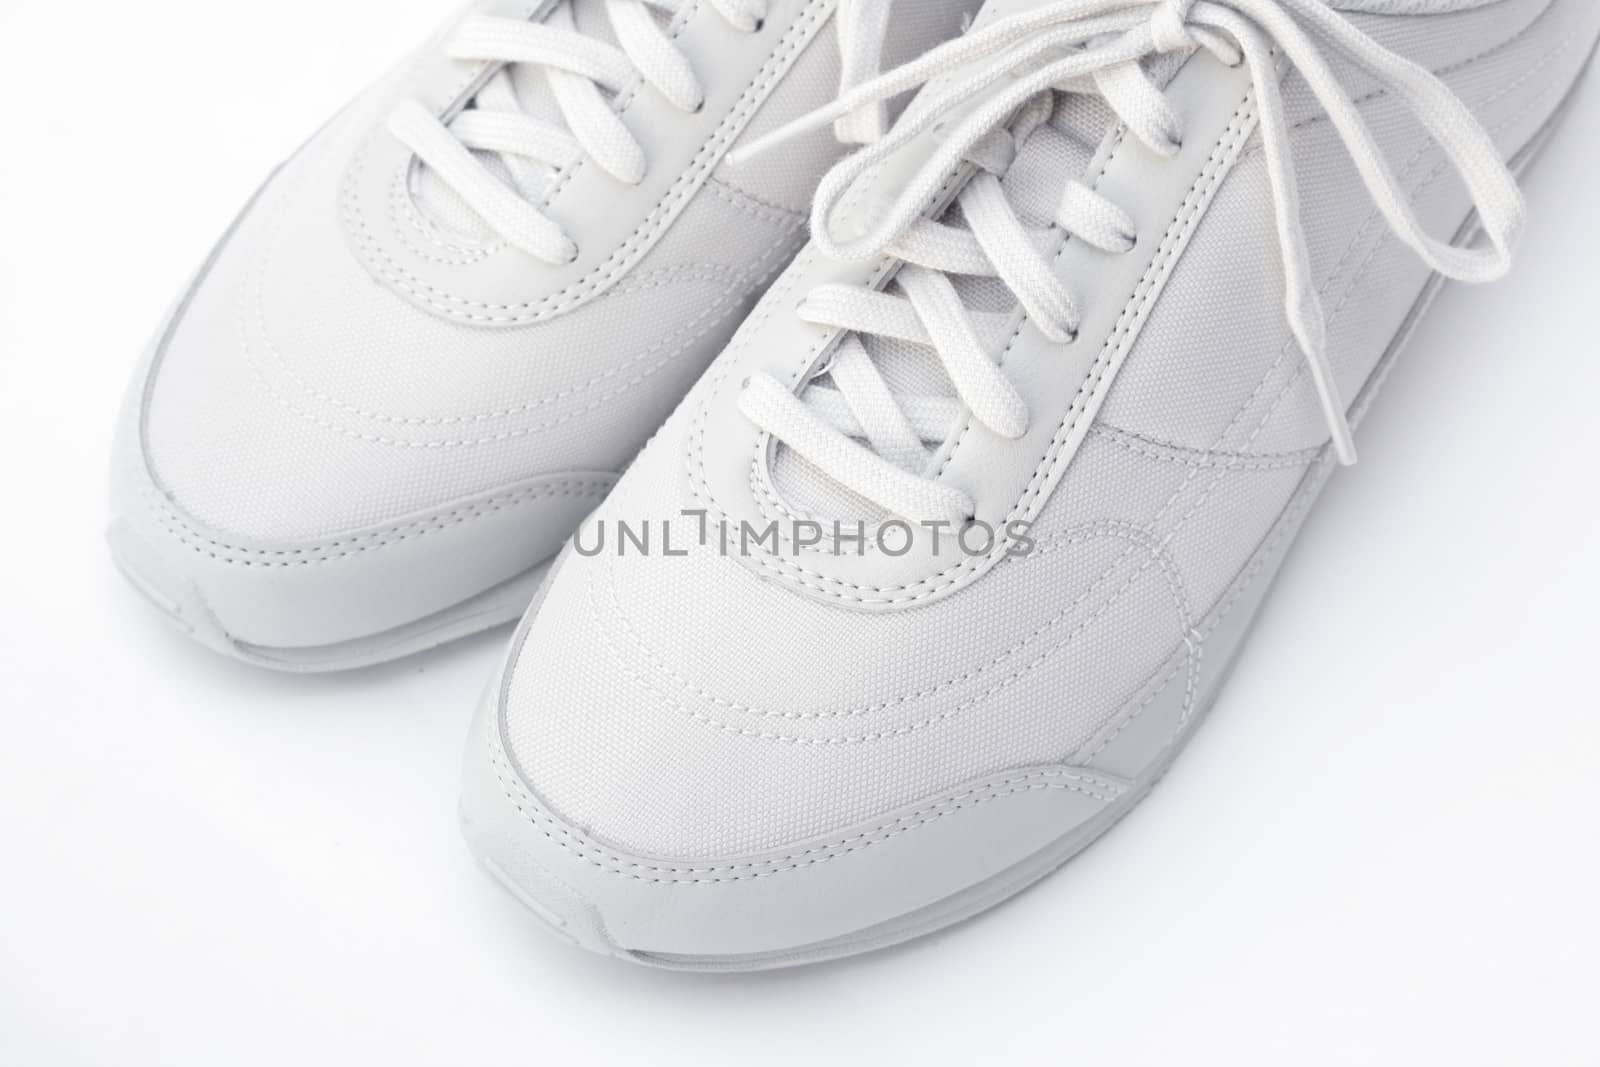 A pair of white running shoes